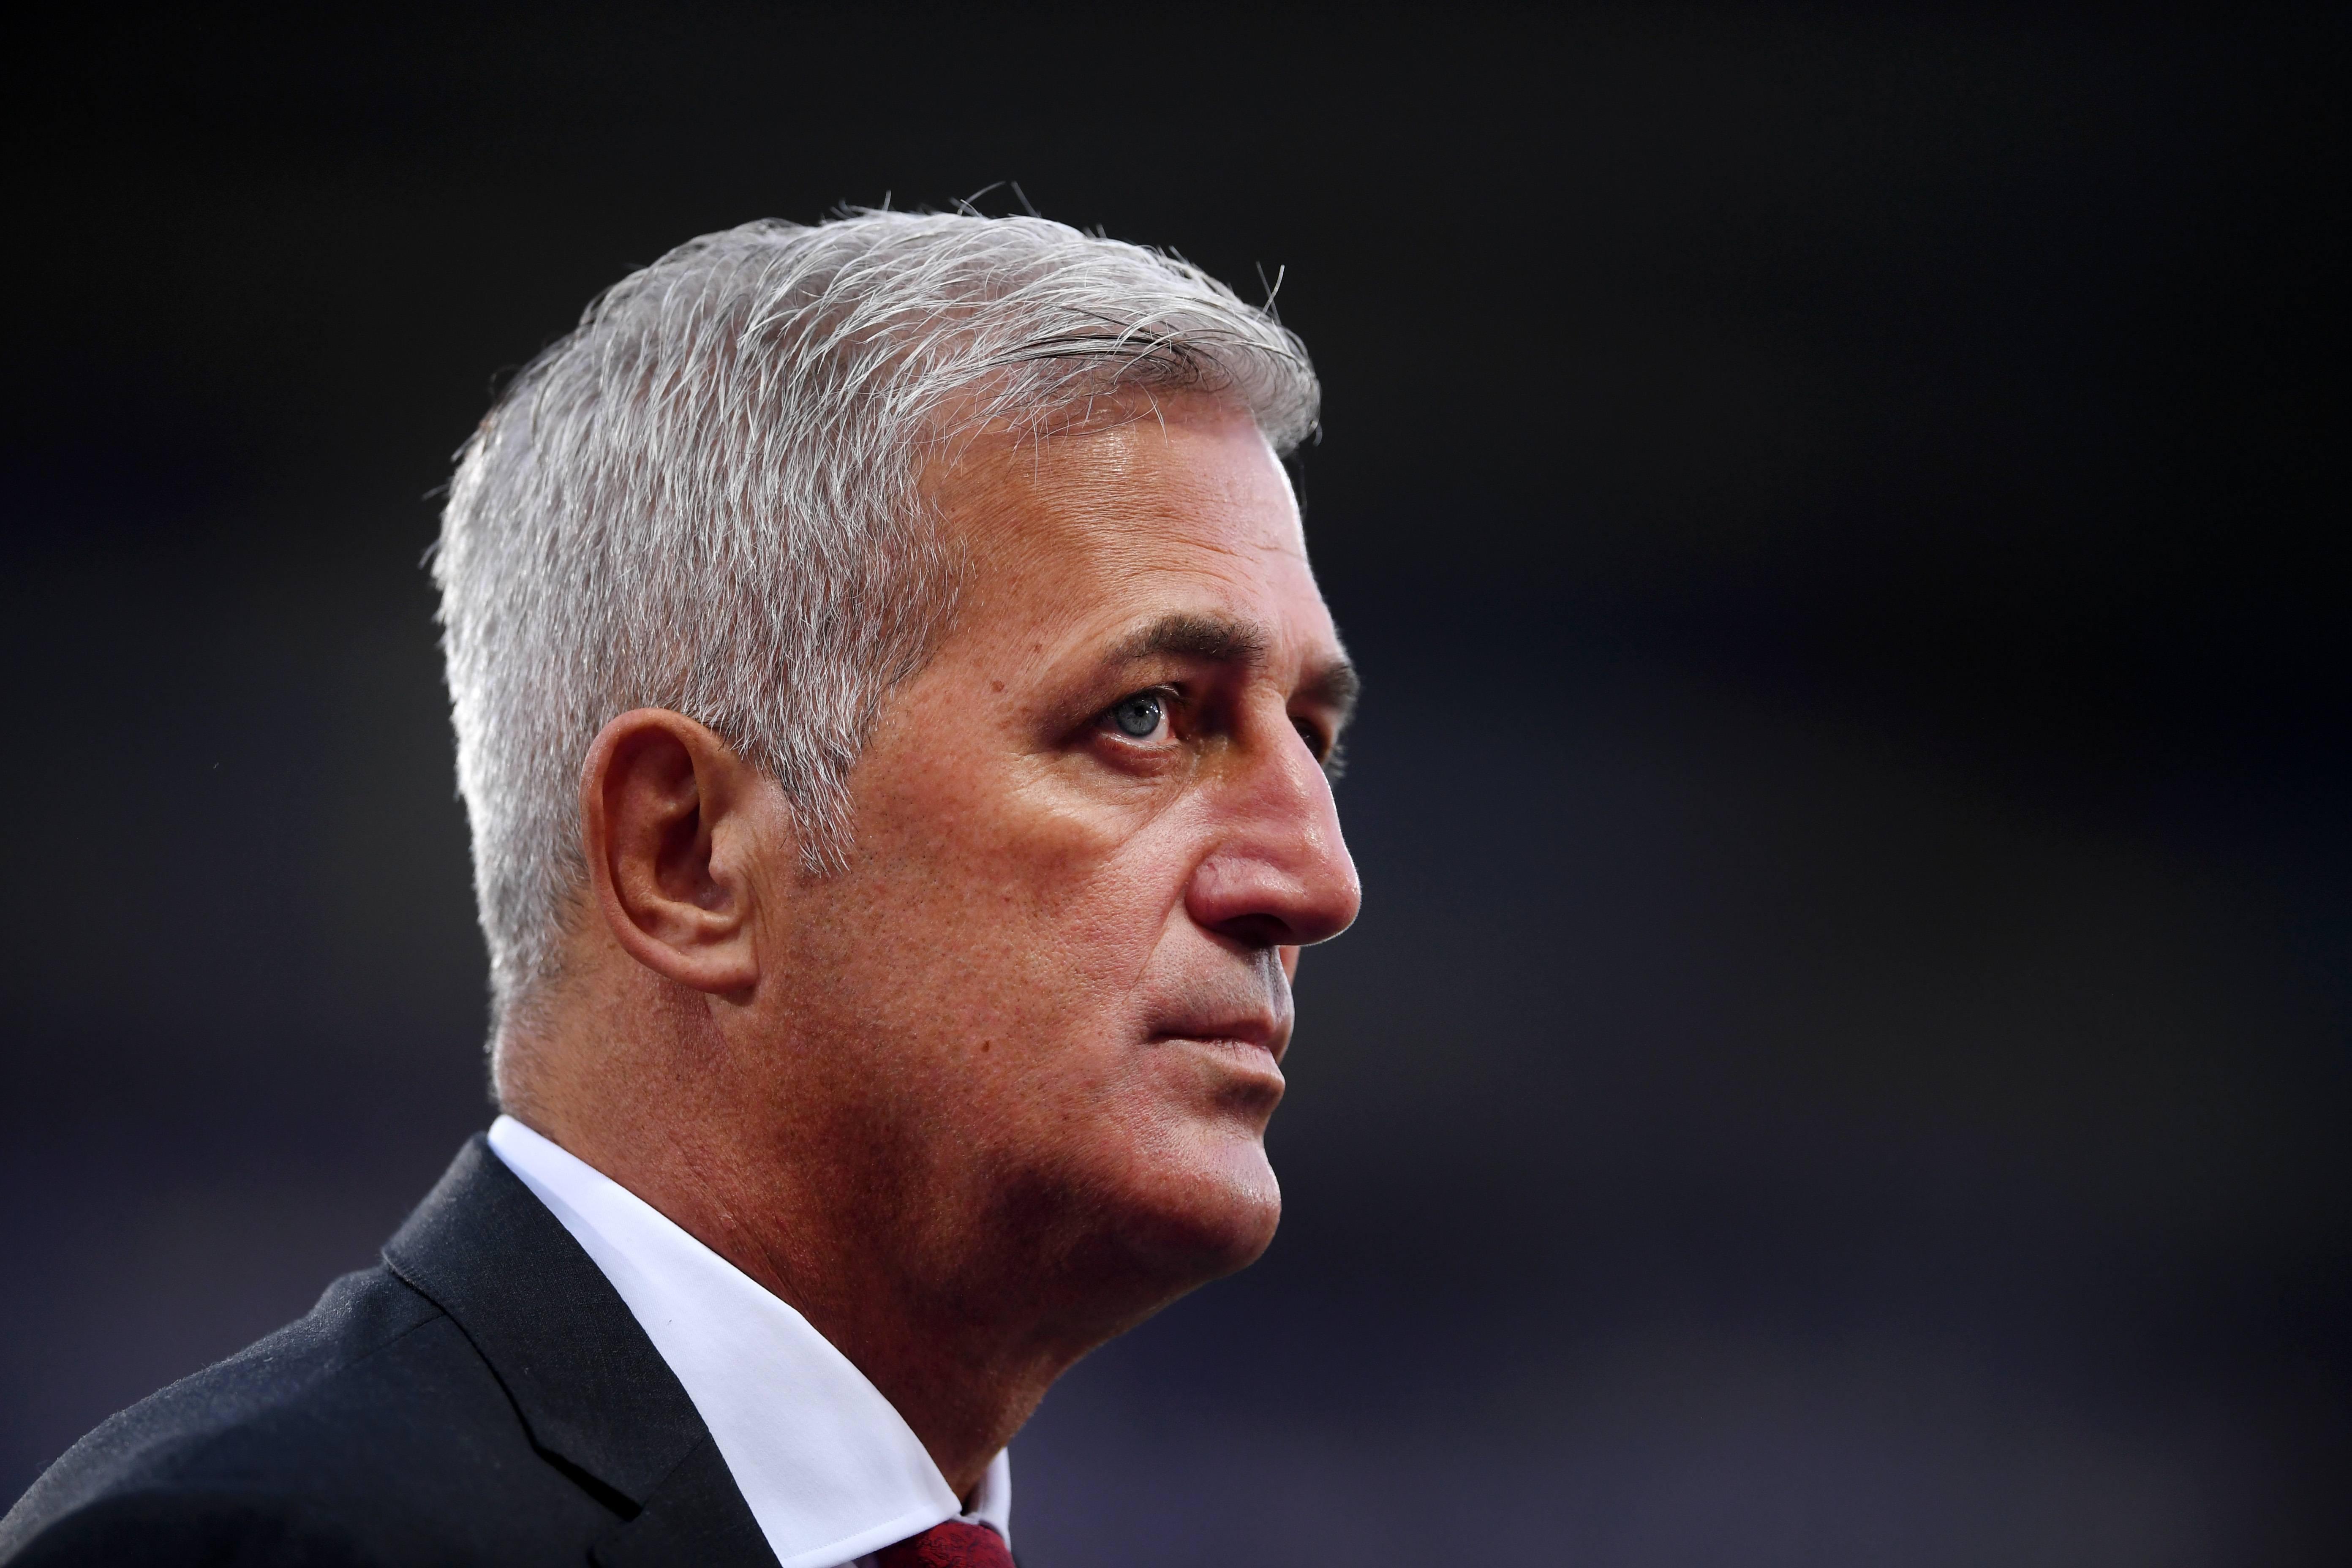 LEICESTER, ENGLAND - SEPTEMBER 11:  Vladimir Petkovic, Head coach of Switzerland looks on prior to the international friendly match between England and Switzerland at The King Power Stadium on September 11, 2018 in Leicester, United Kingdom.  (Photo by Laurence Griffiths/Getty Images)